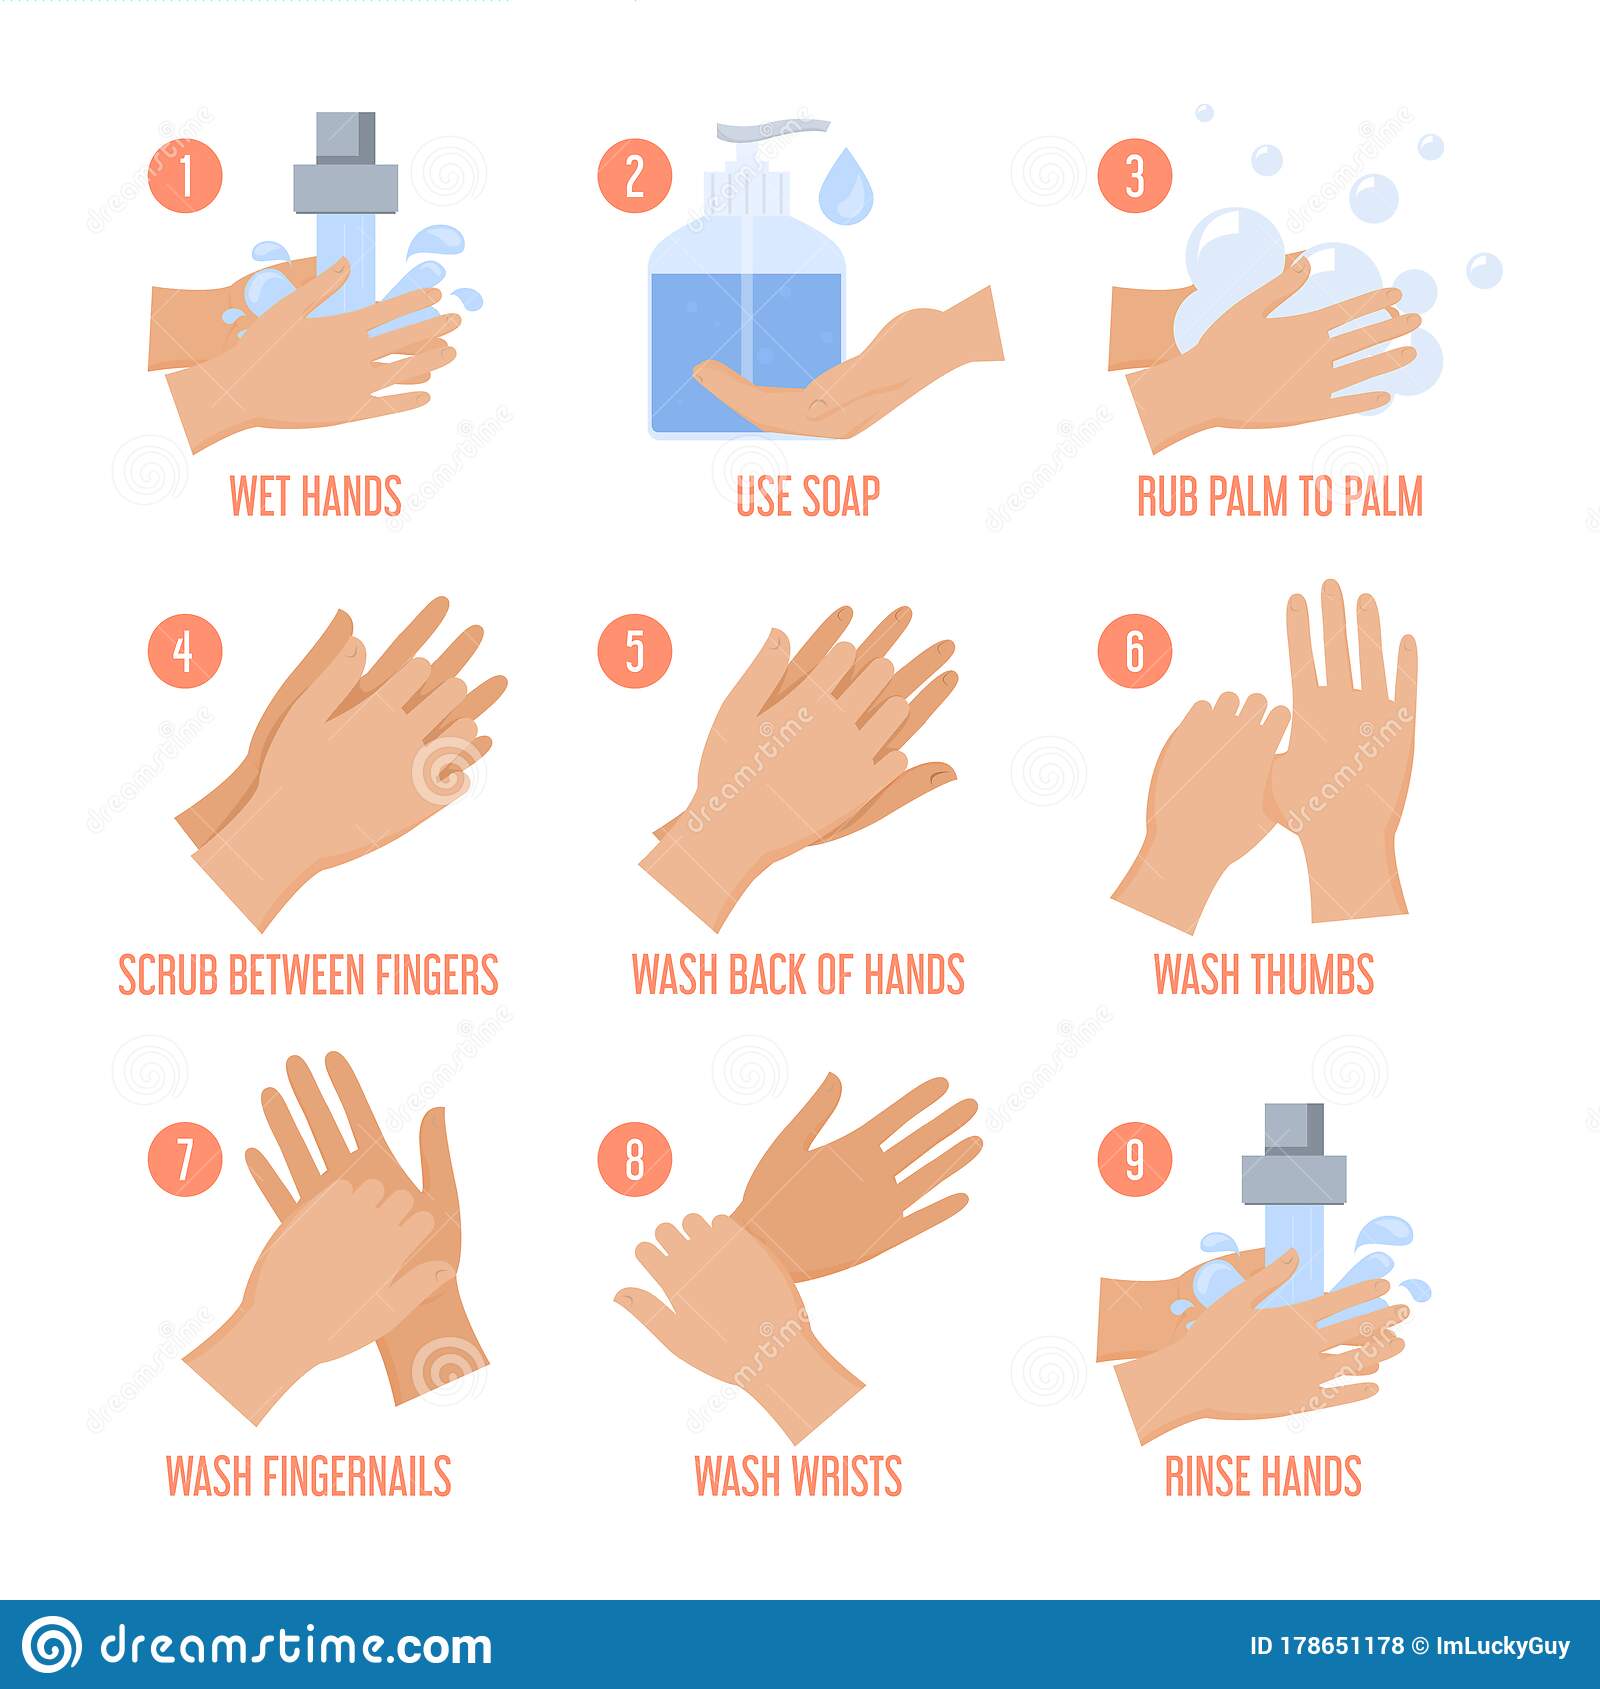 how-to-wash-hands-instruction-vector-isolated-personal-hygiene-protection-virus-germs-wet-hands-soap-medical-quidance-178651178